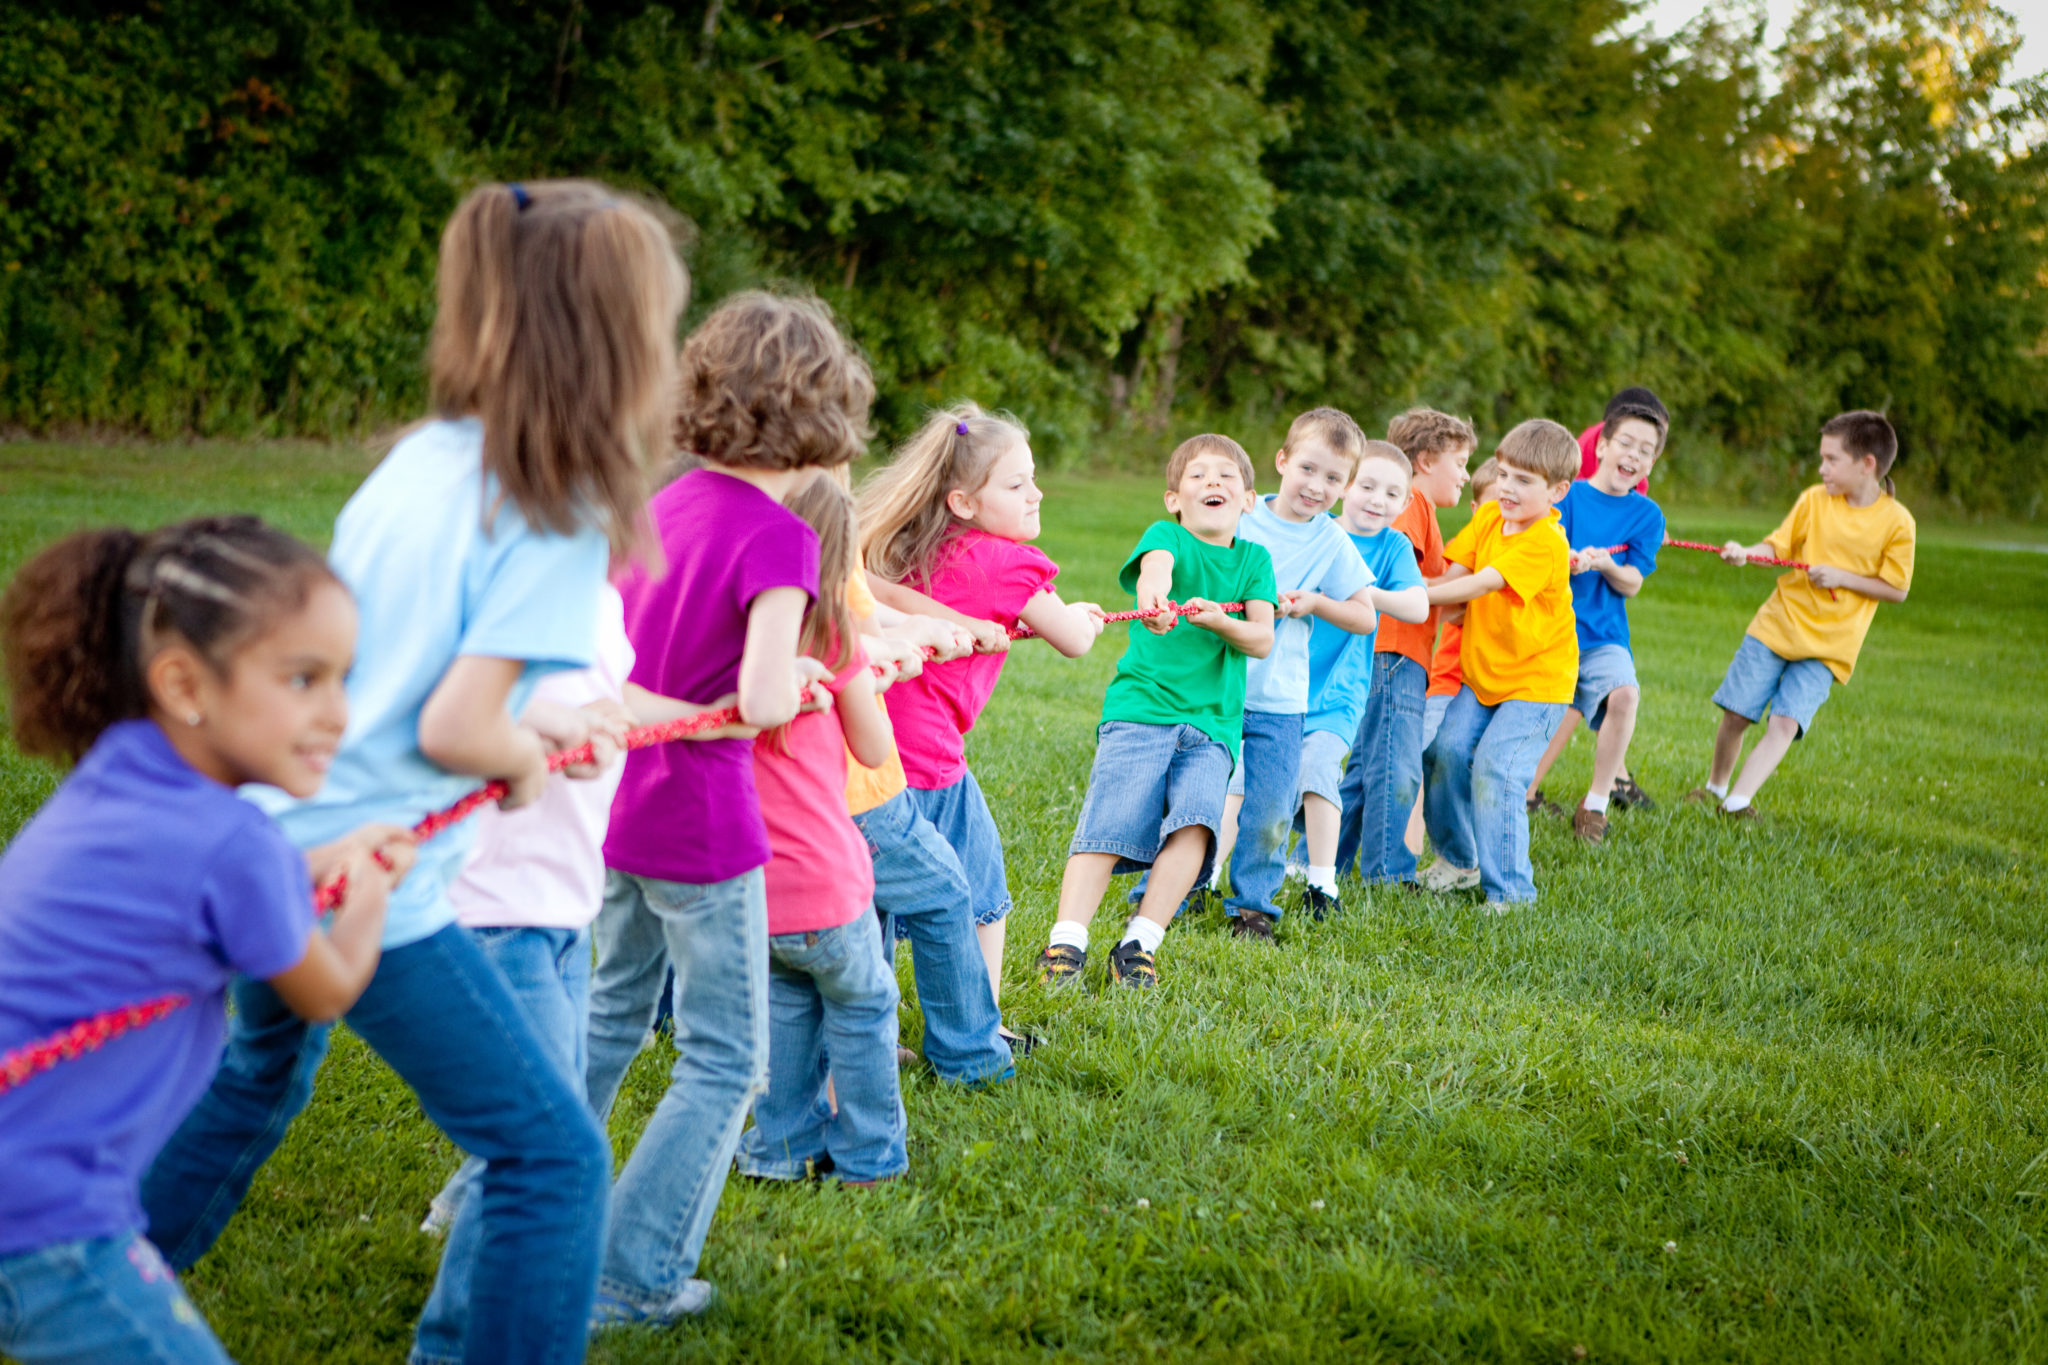 Color stock photo of a girls versus boys Tug of War game outside.